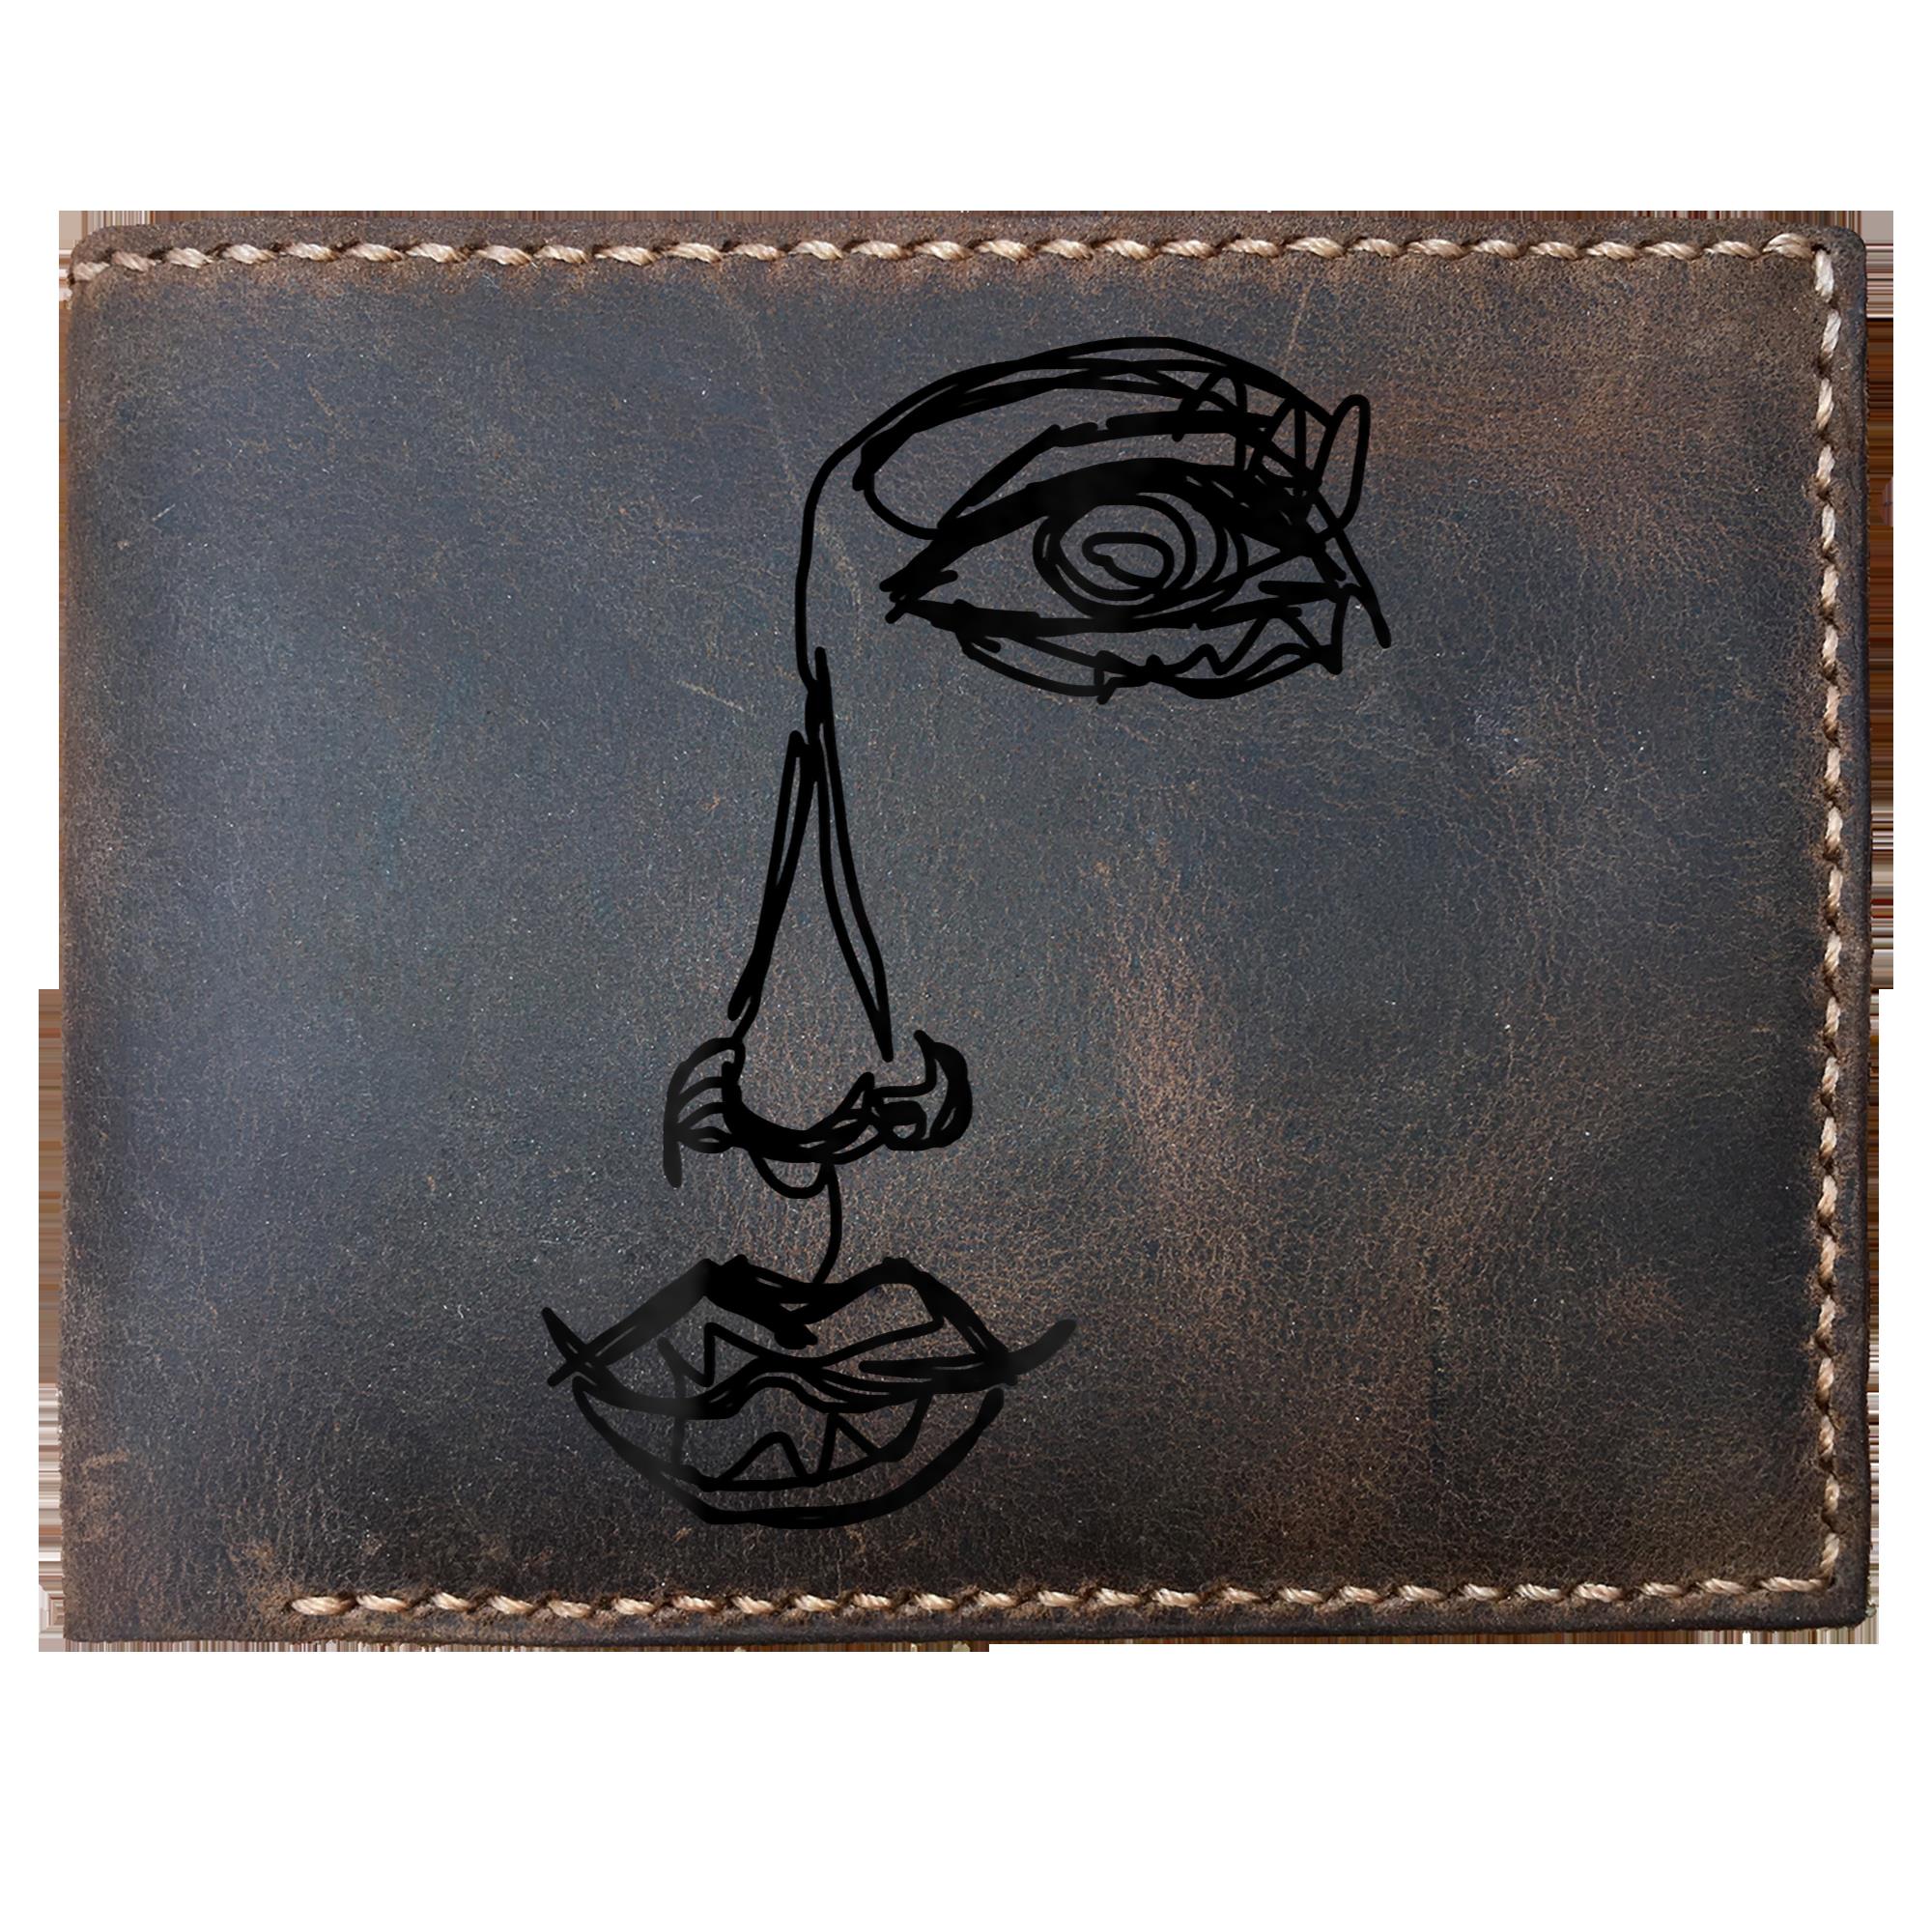 Skitongifts Funny Custom Laser Engraved Bifold Leather Wallet For Men, One Line Drawing Face